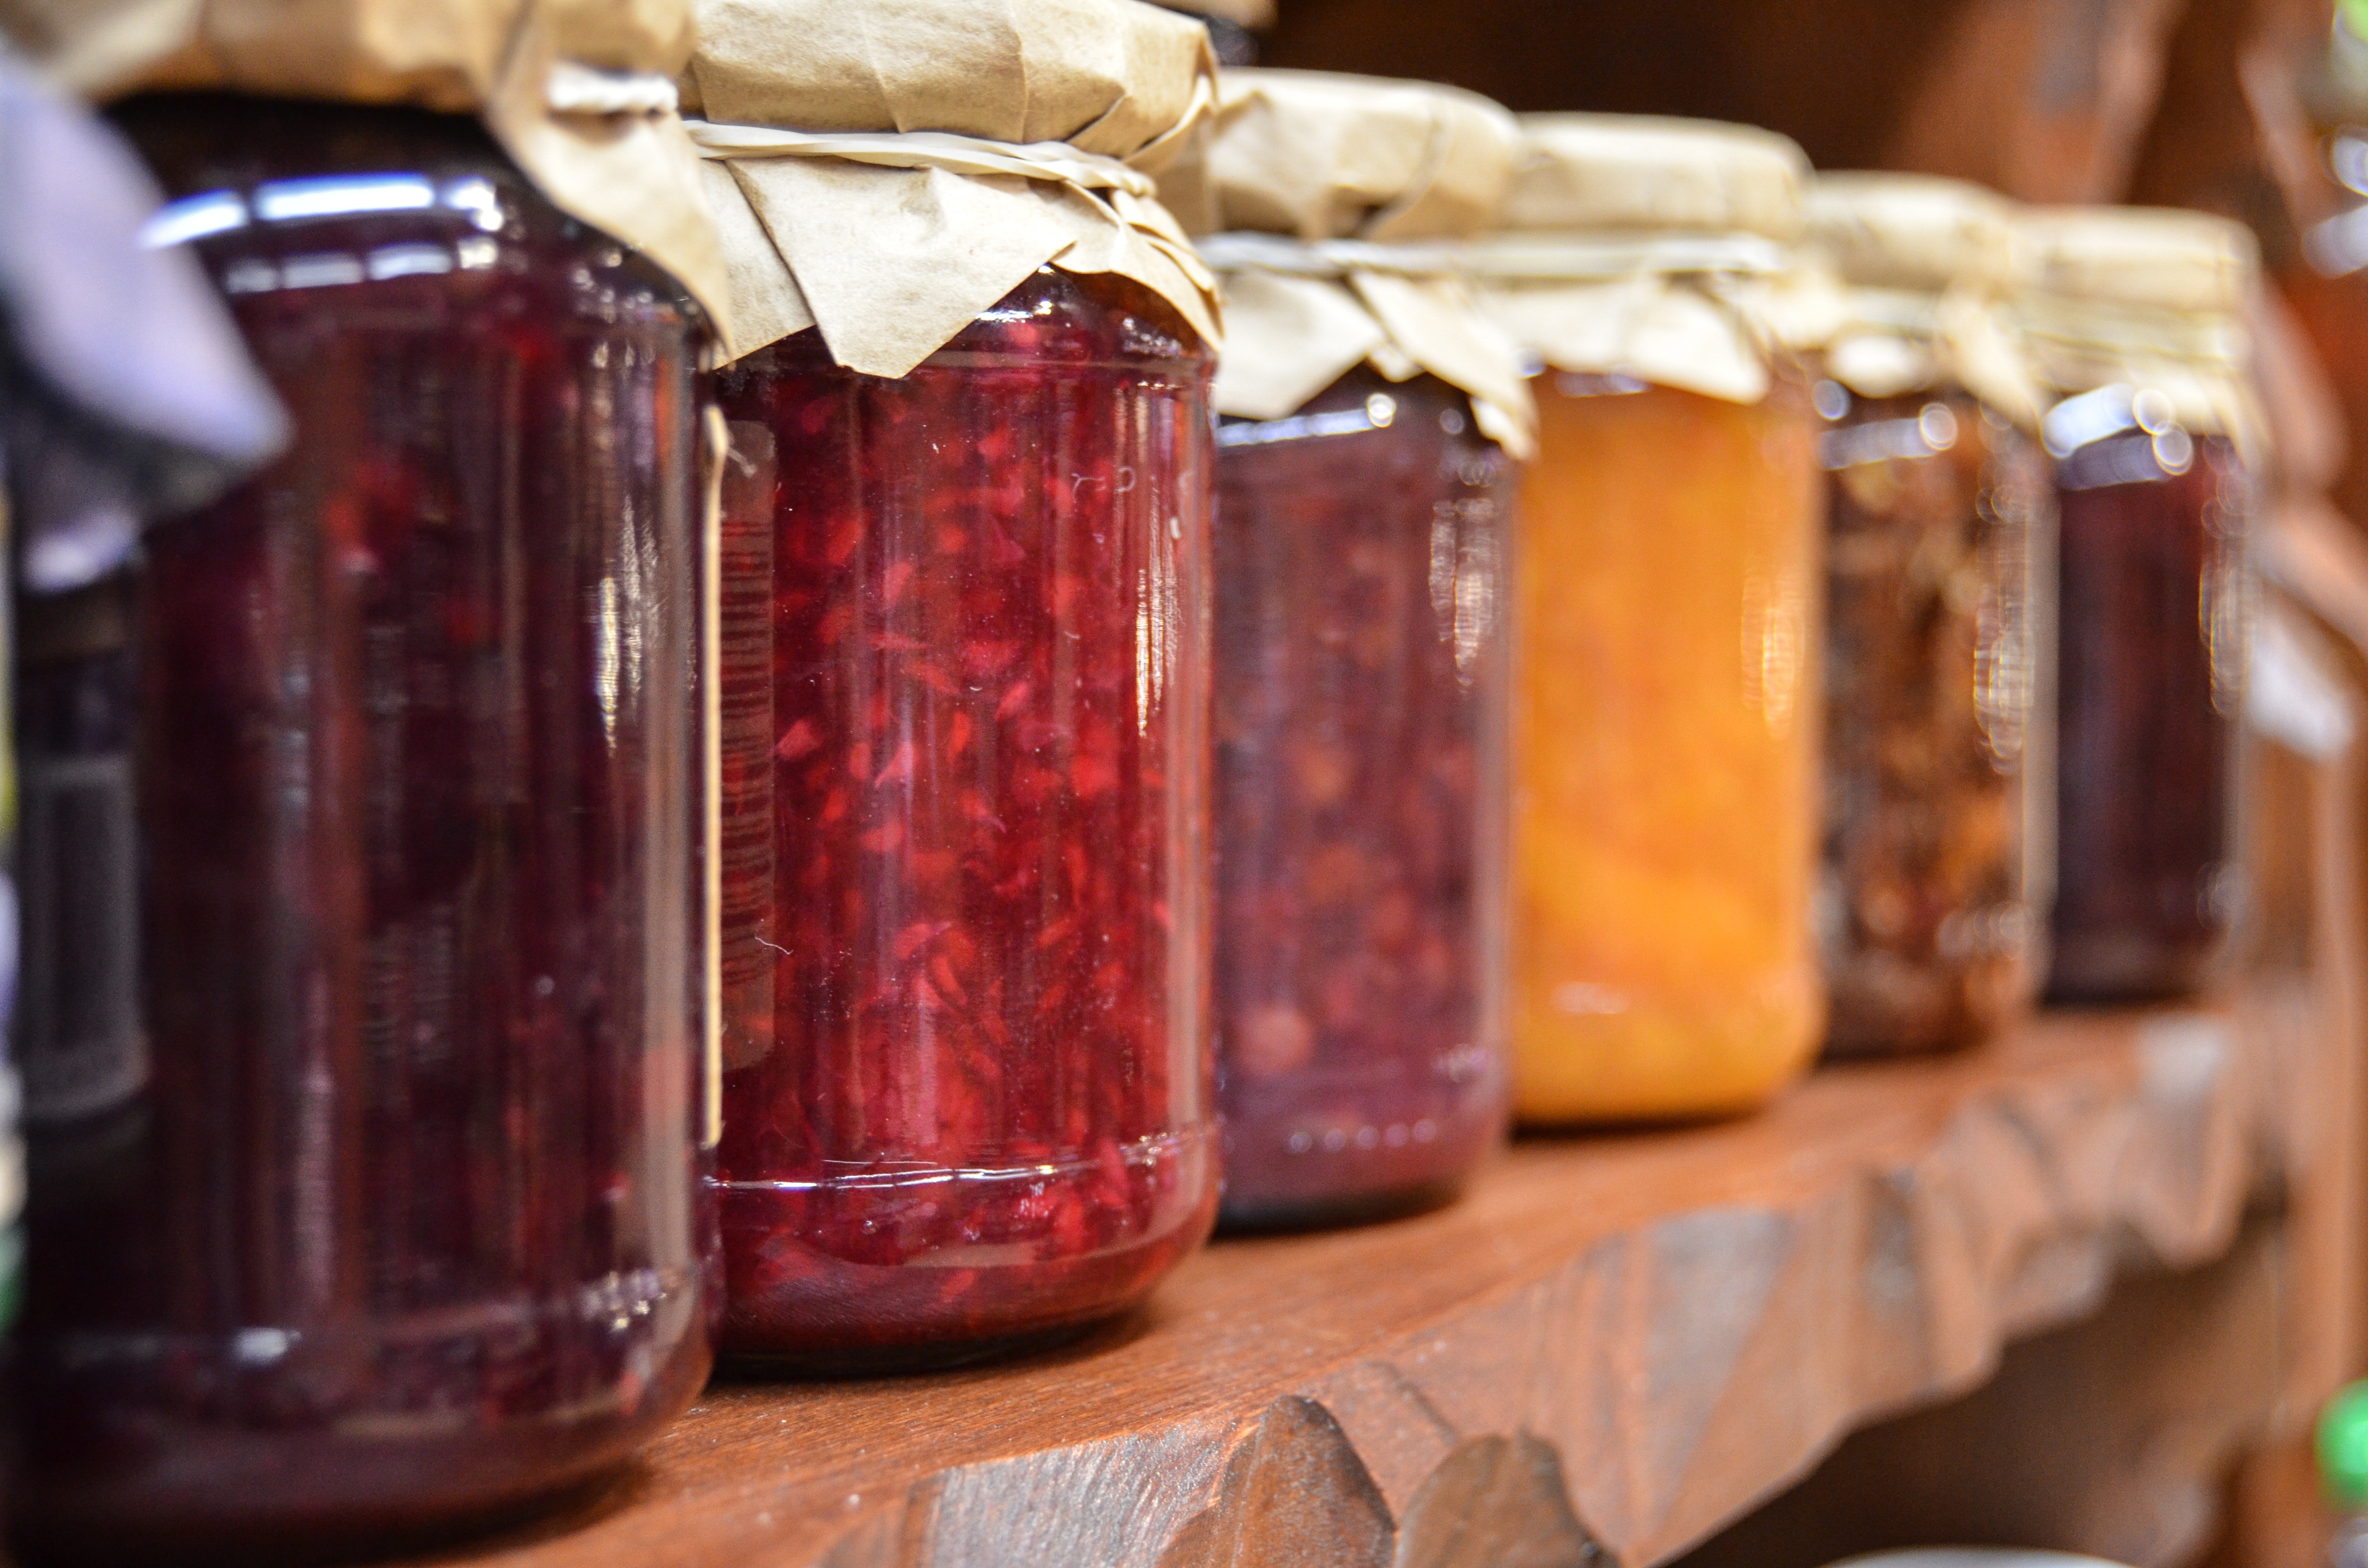 Enjoy this unique online workshop – learn about the age-old practice of pickling and preserving to sustainably keep food fresh, while reducing food waste! Learn a new skill that you can put into practice right away. This presentation features